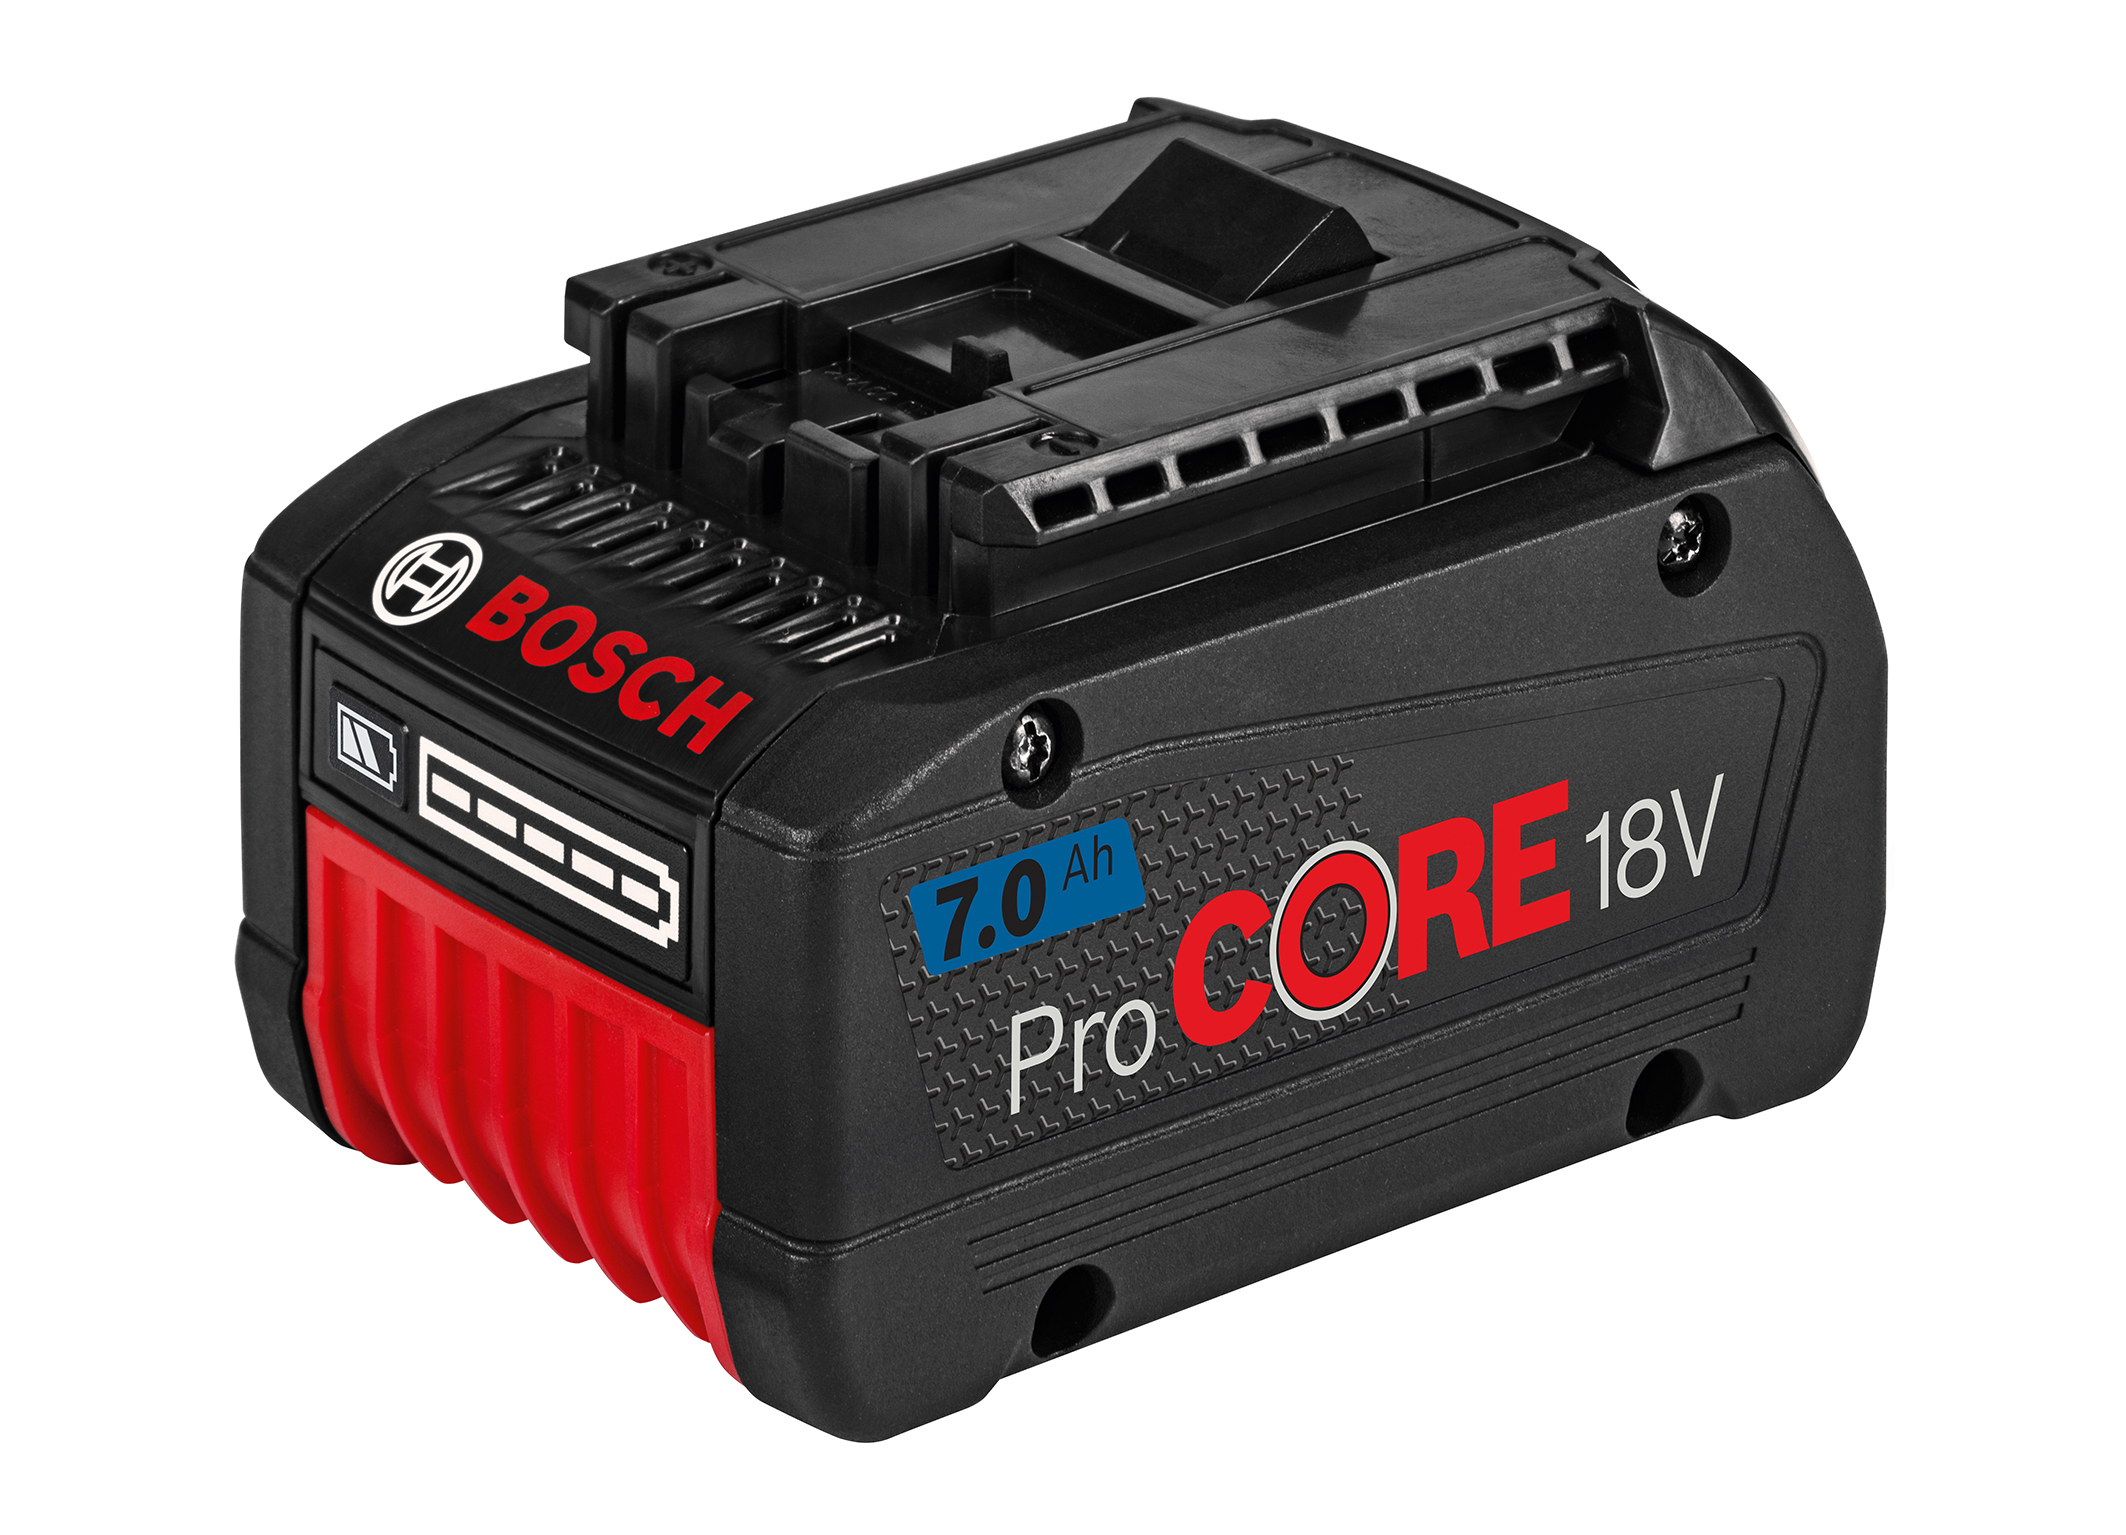 More power for professionals: Bosch ProCore18V 7.0 Ah high-performance battery 